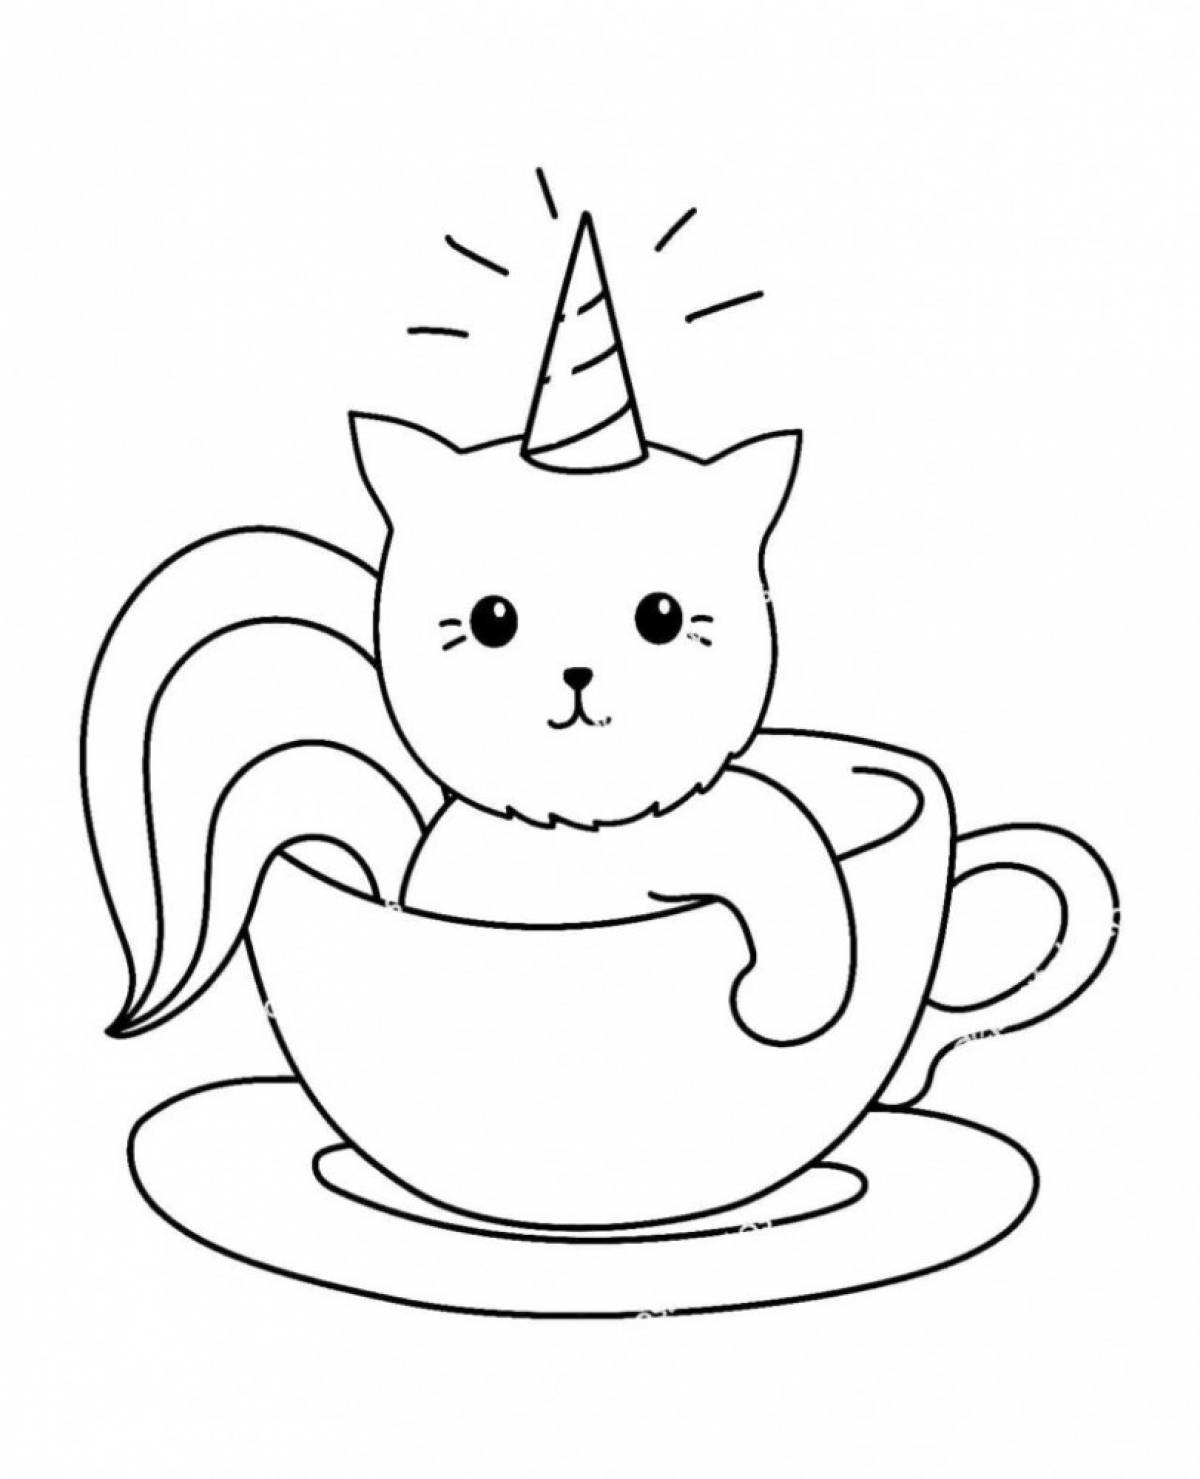 Coloring page serene cat in a mug